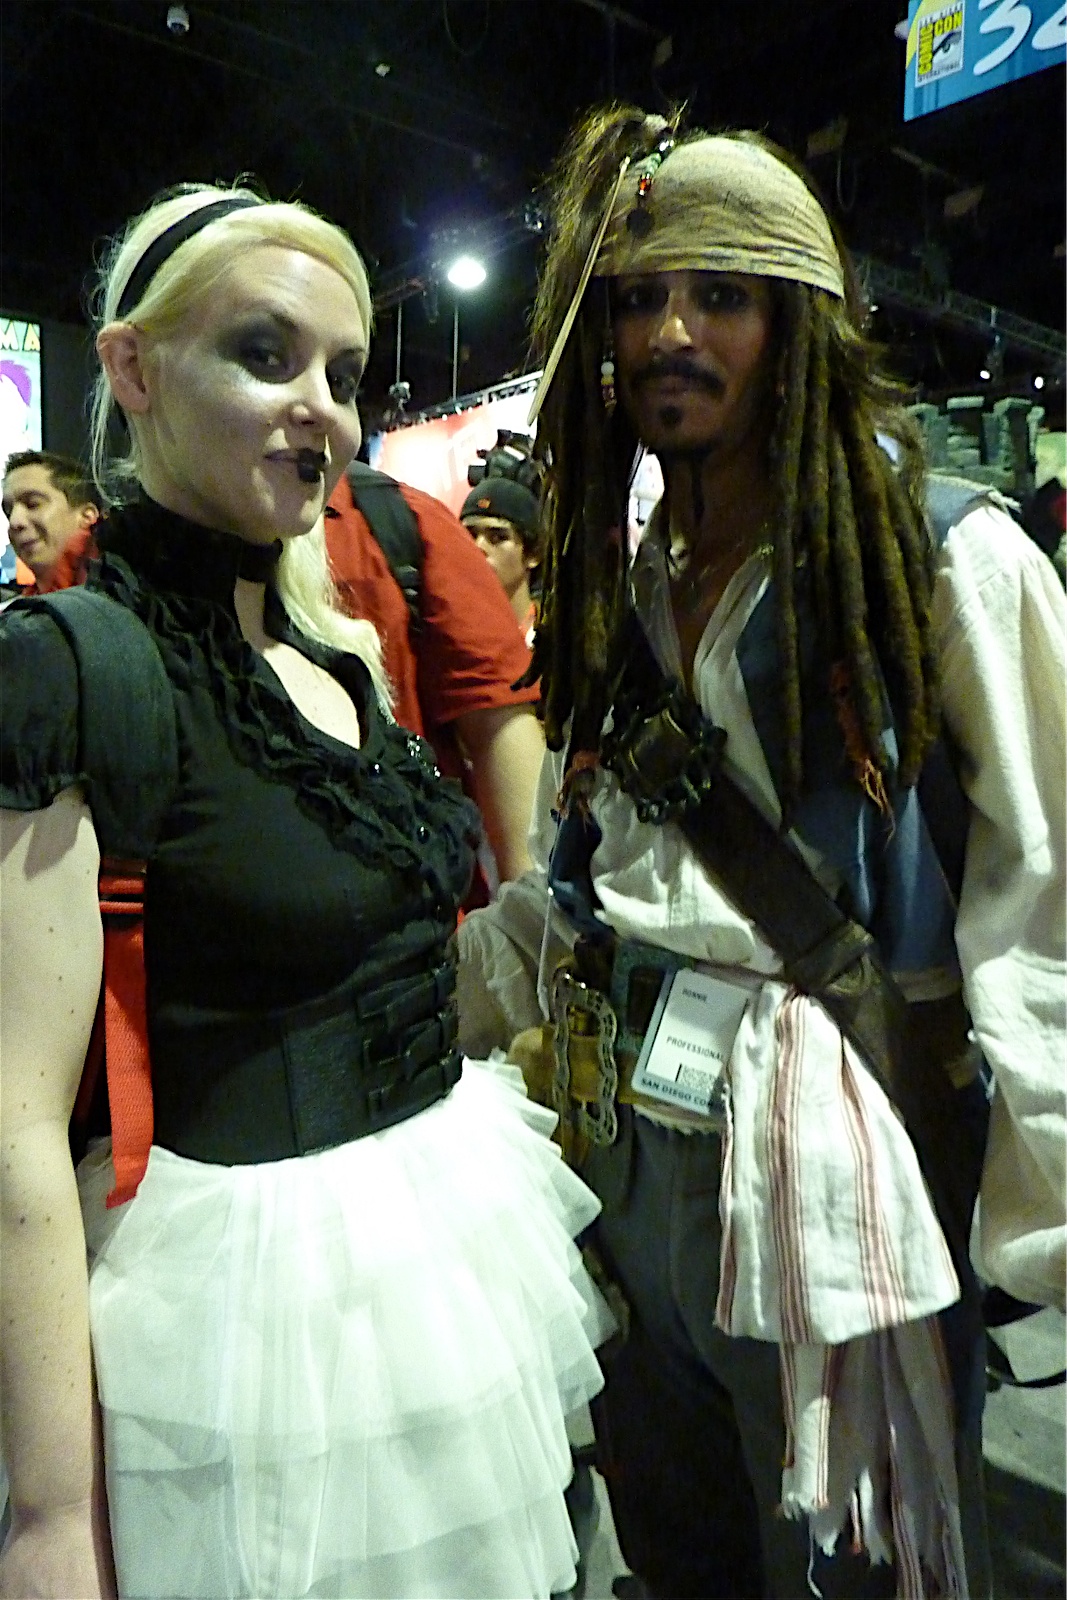 KIDS N THE KNOW ONLINE: My Best Costume COMIC CON 2011 pics and 1 Don't!